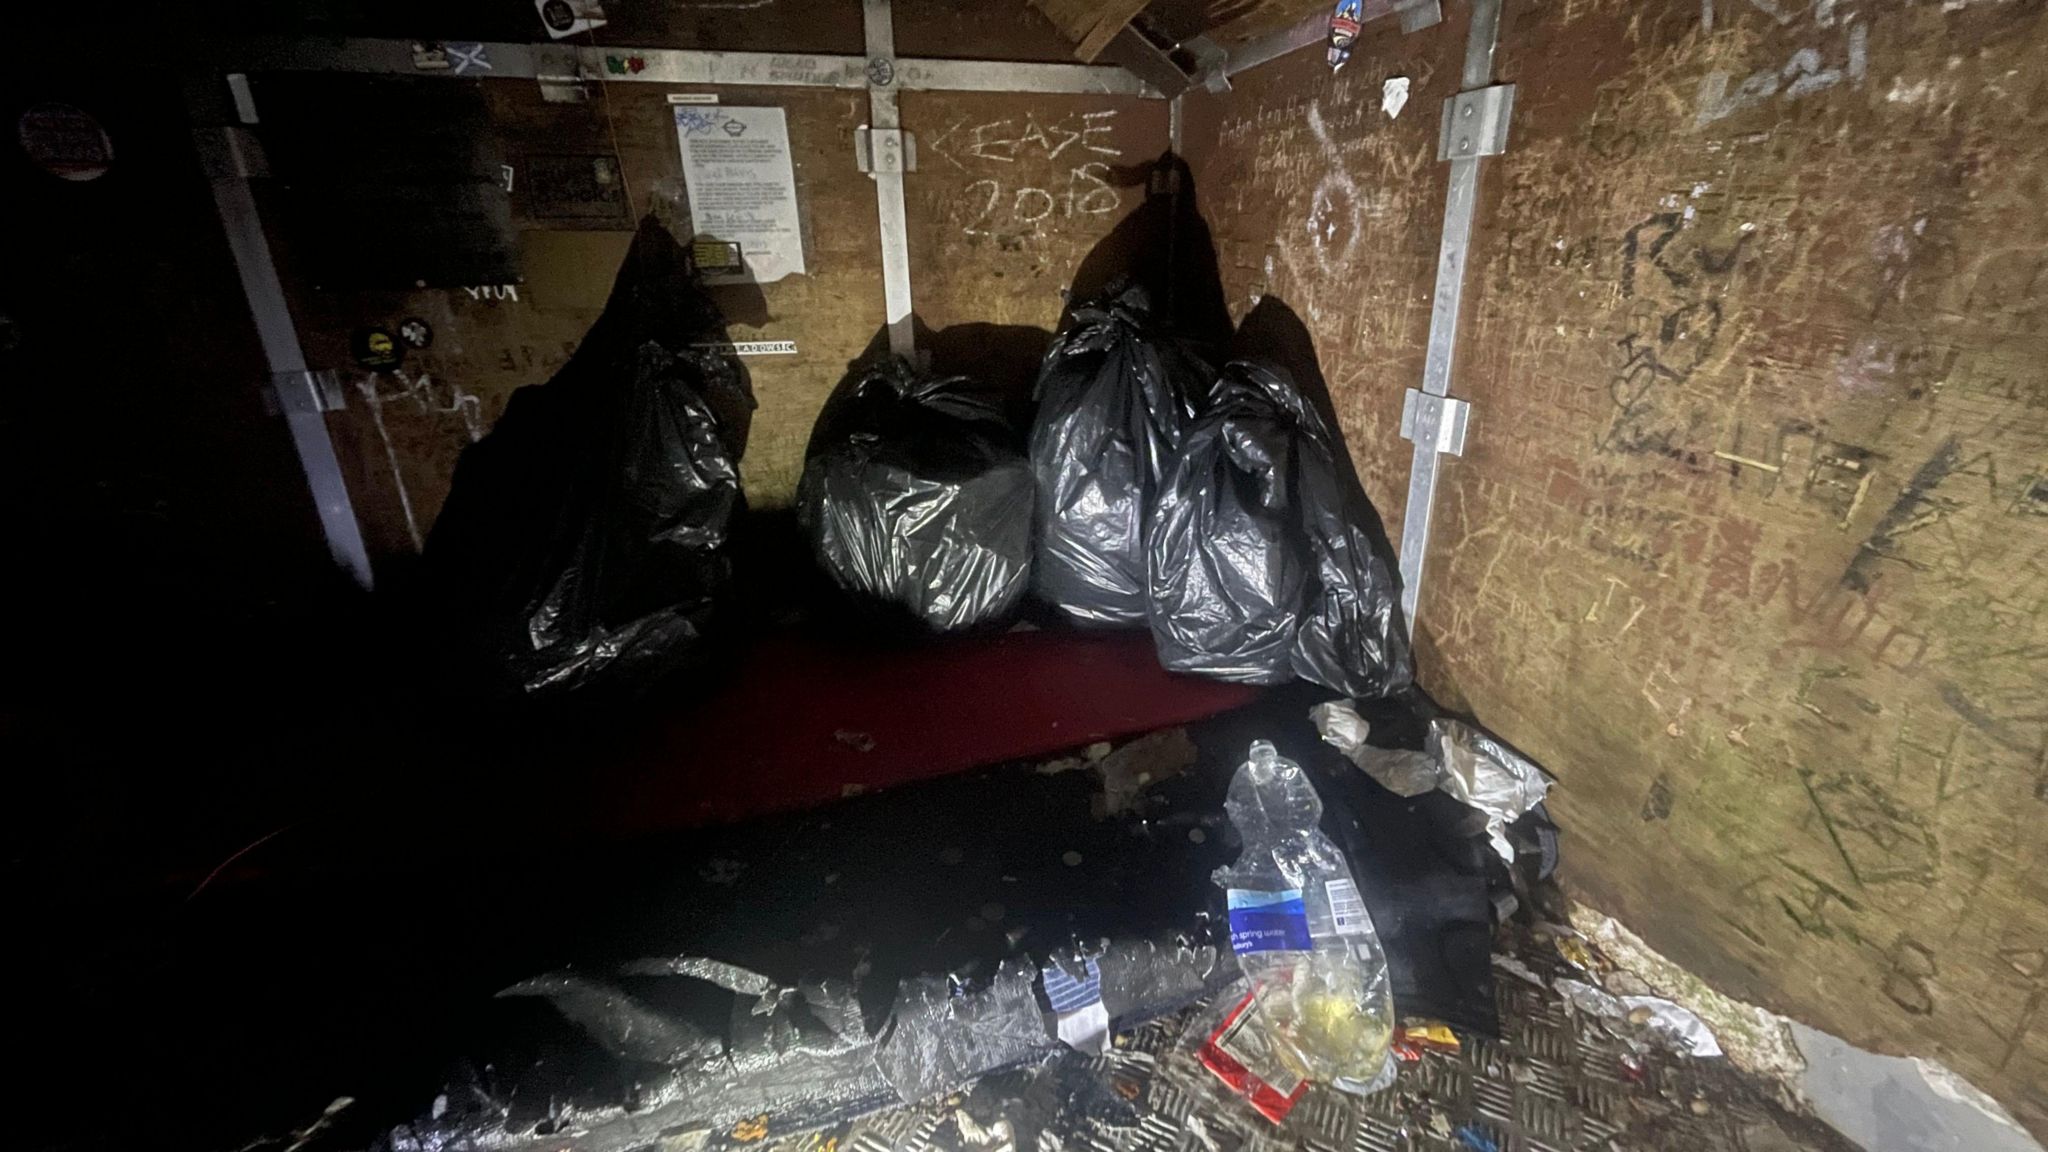 Bags of rubbish in a Ben Nevis night shelter